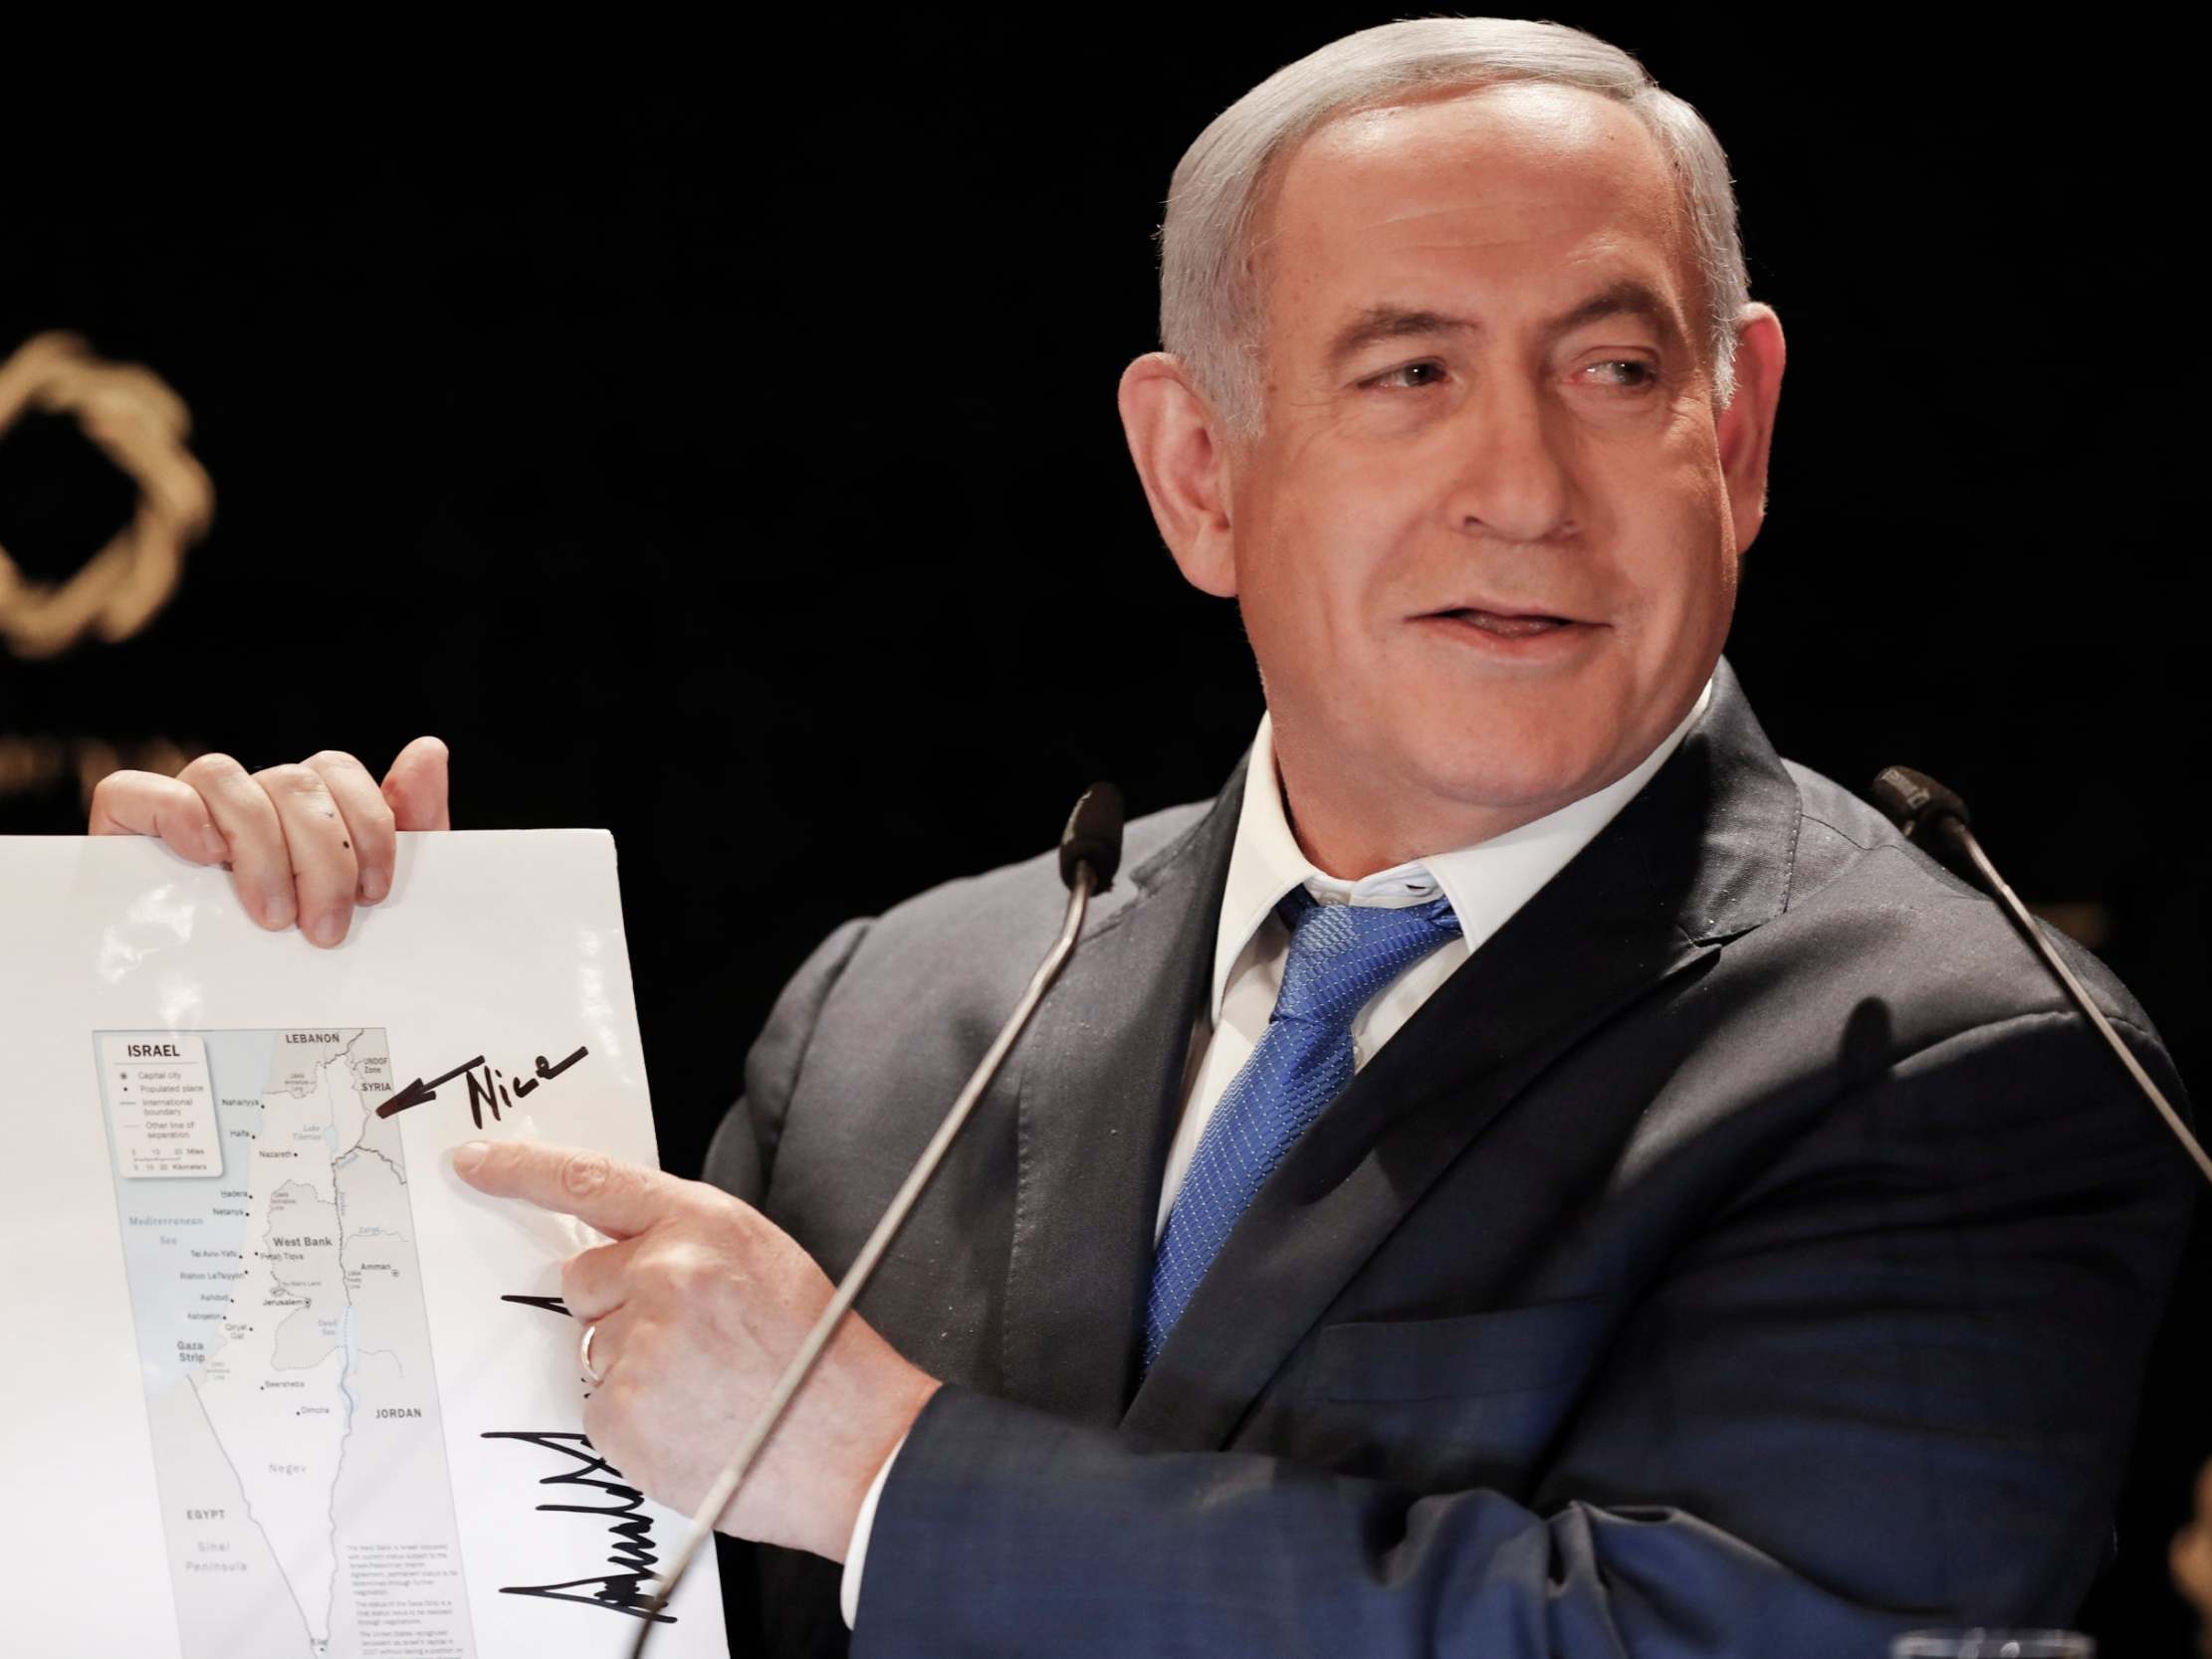 Israeli prime minister Benjamin Netanyahu points to the Golan Heights on a map of Israel signed by Donald Trump